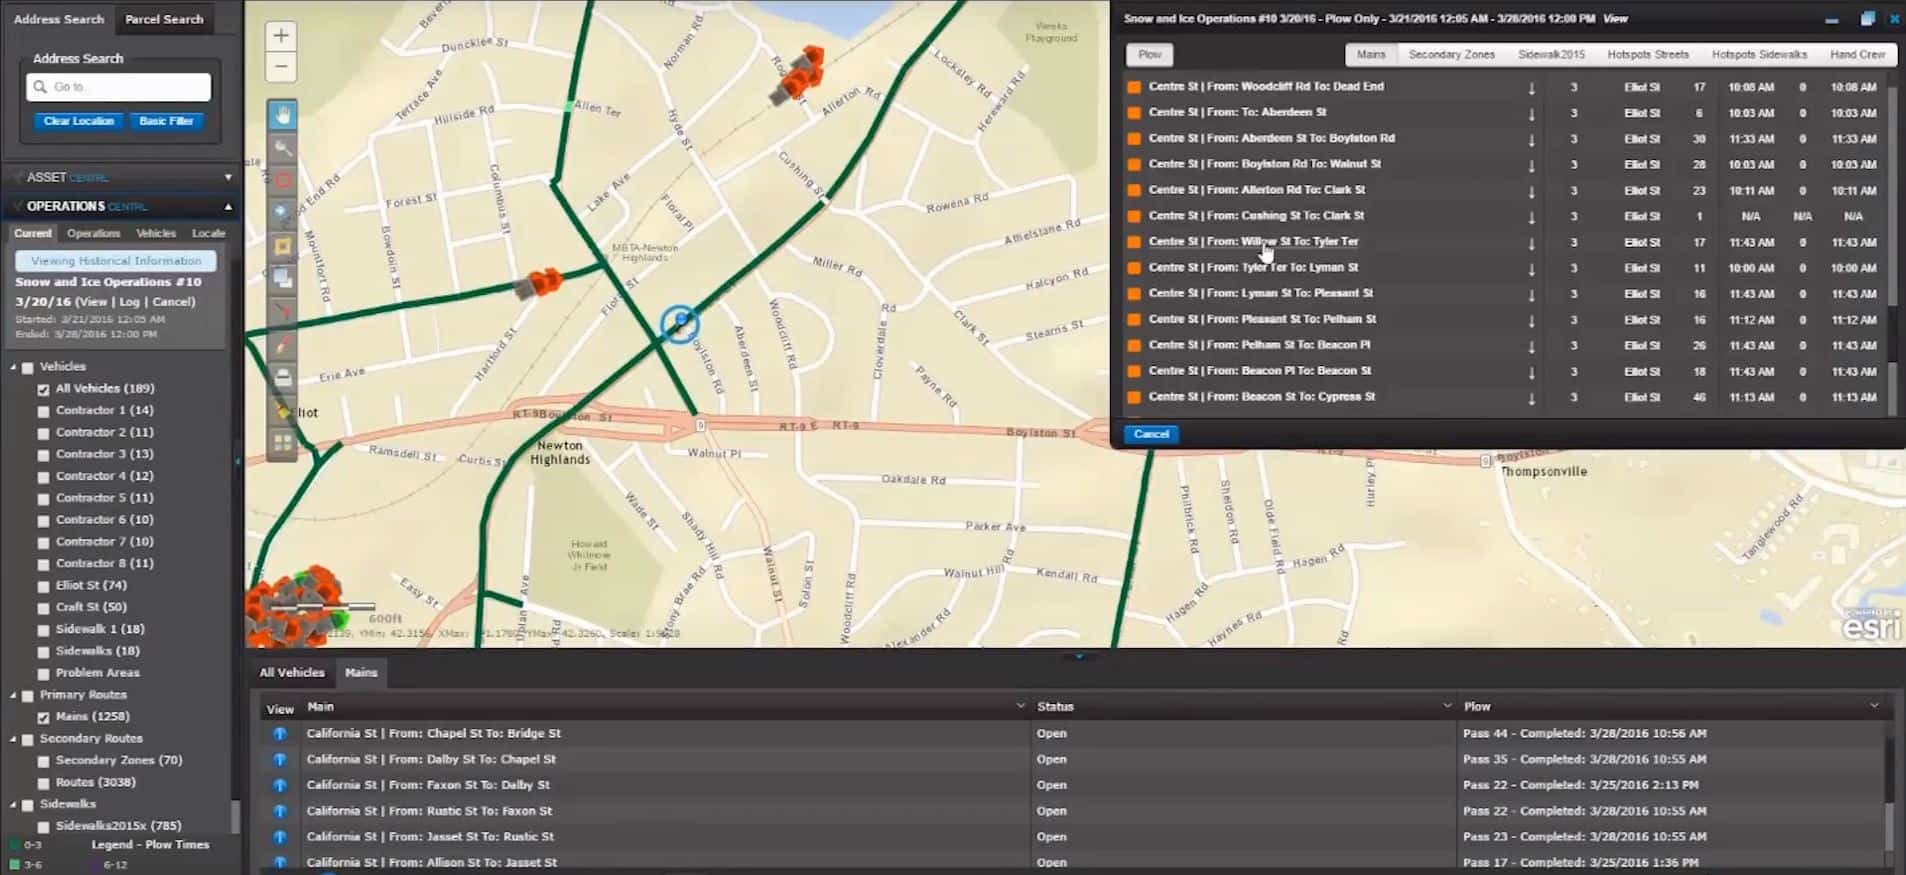 Track Your Winter Operations & Fleet with TRAISR